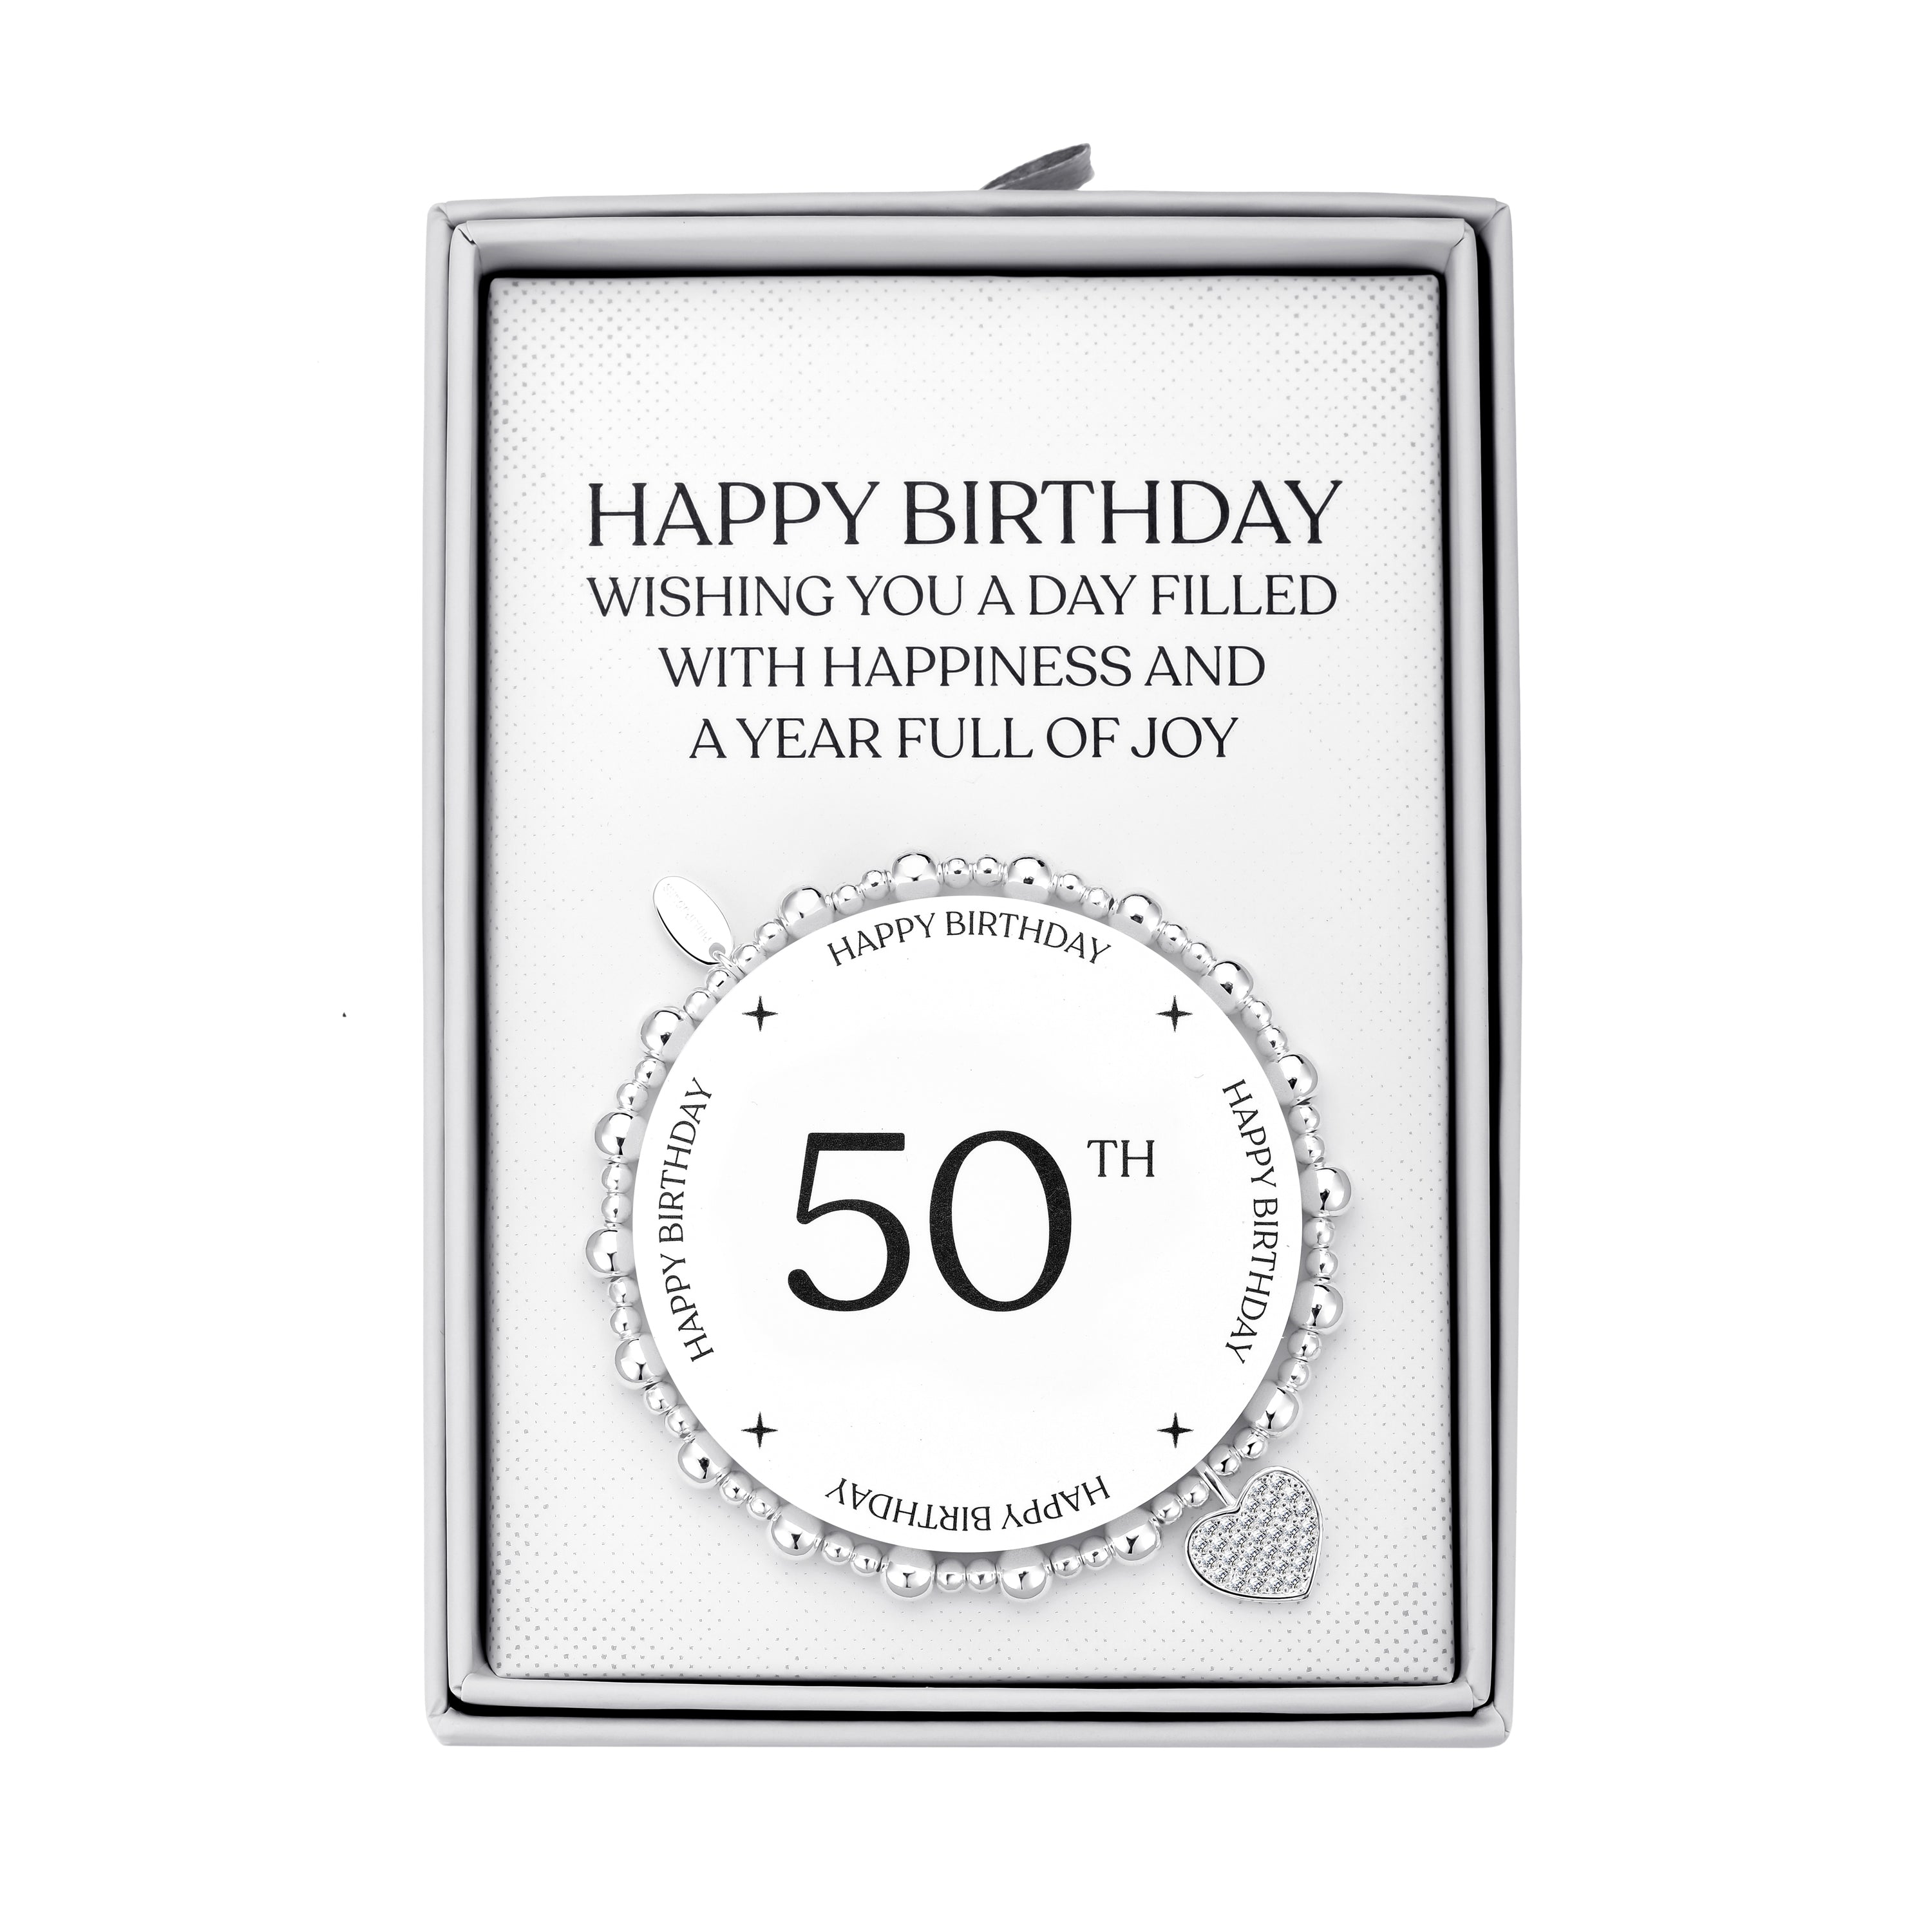 50th Birthday Heart Charm Stretch Bracelet with Quote Gift Box by Philip Jones Jewellery